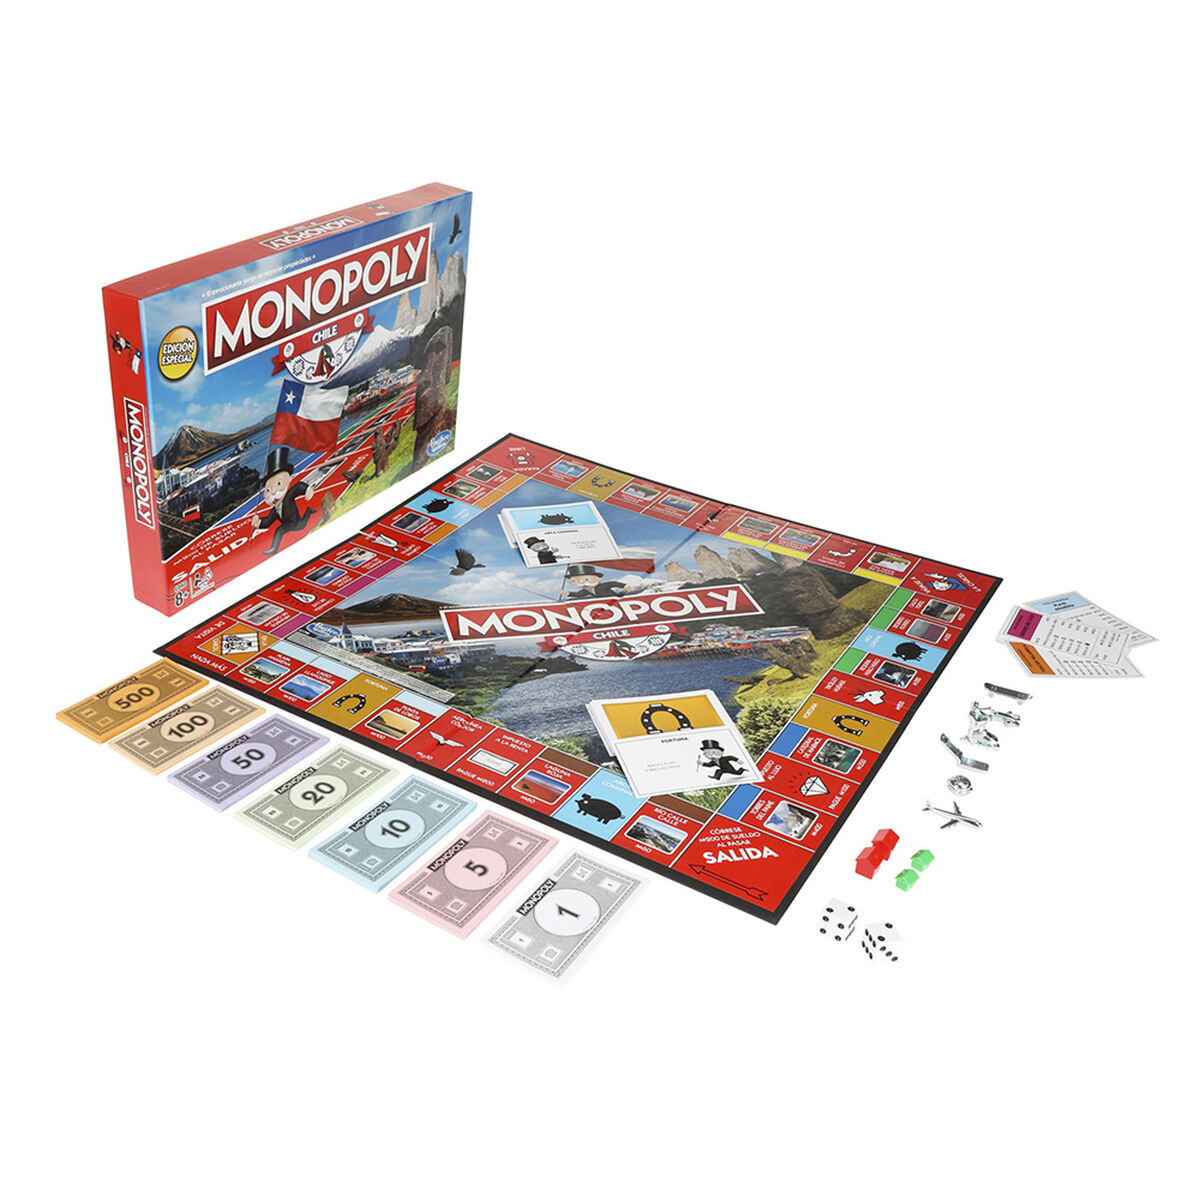 Monopoly Chile